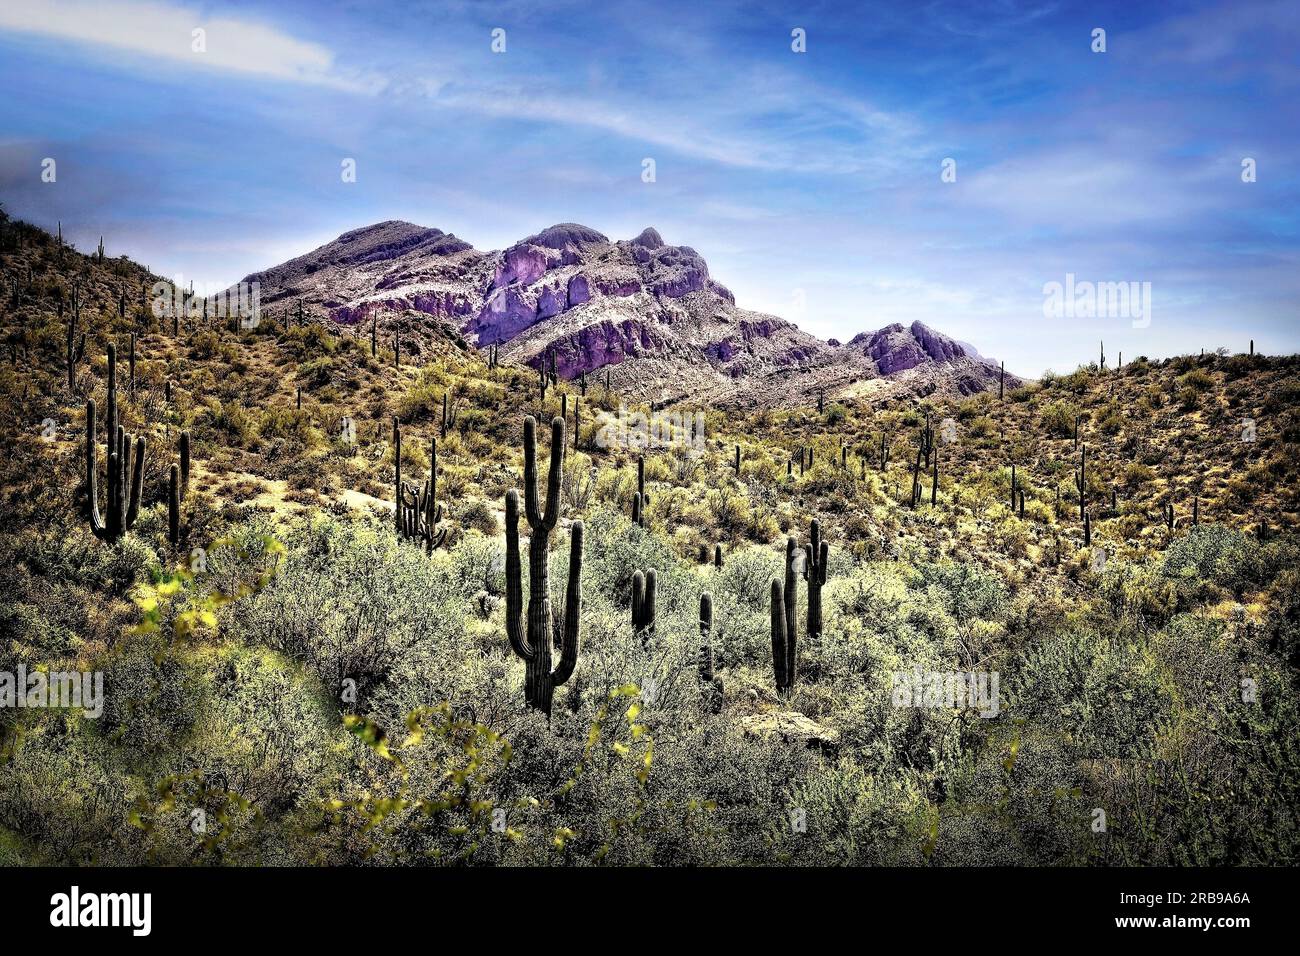 The Superstition Mountains rise above in the Sonoran desert of Arizona. Stock Photo